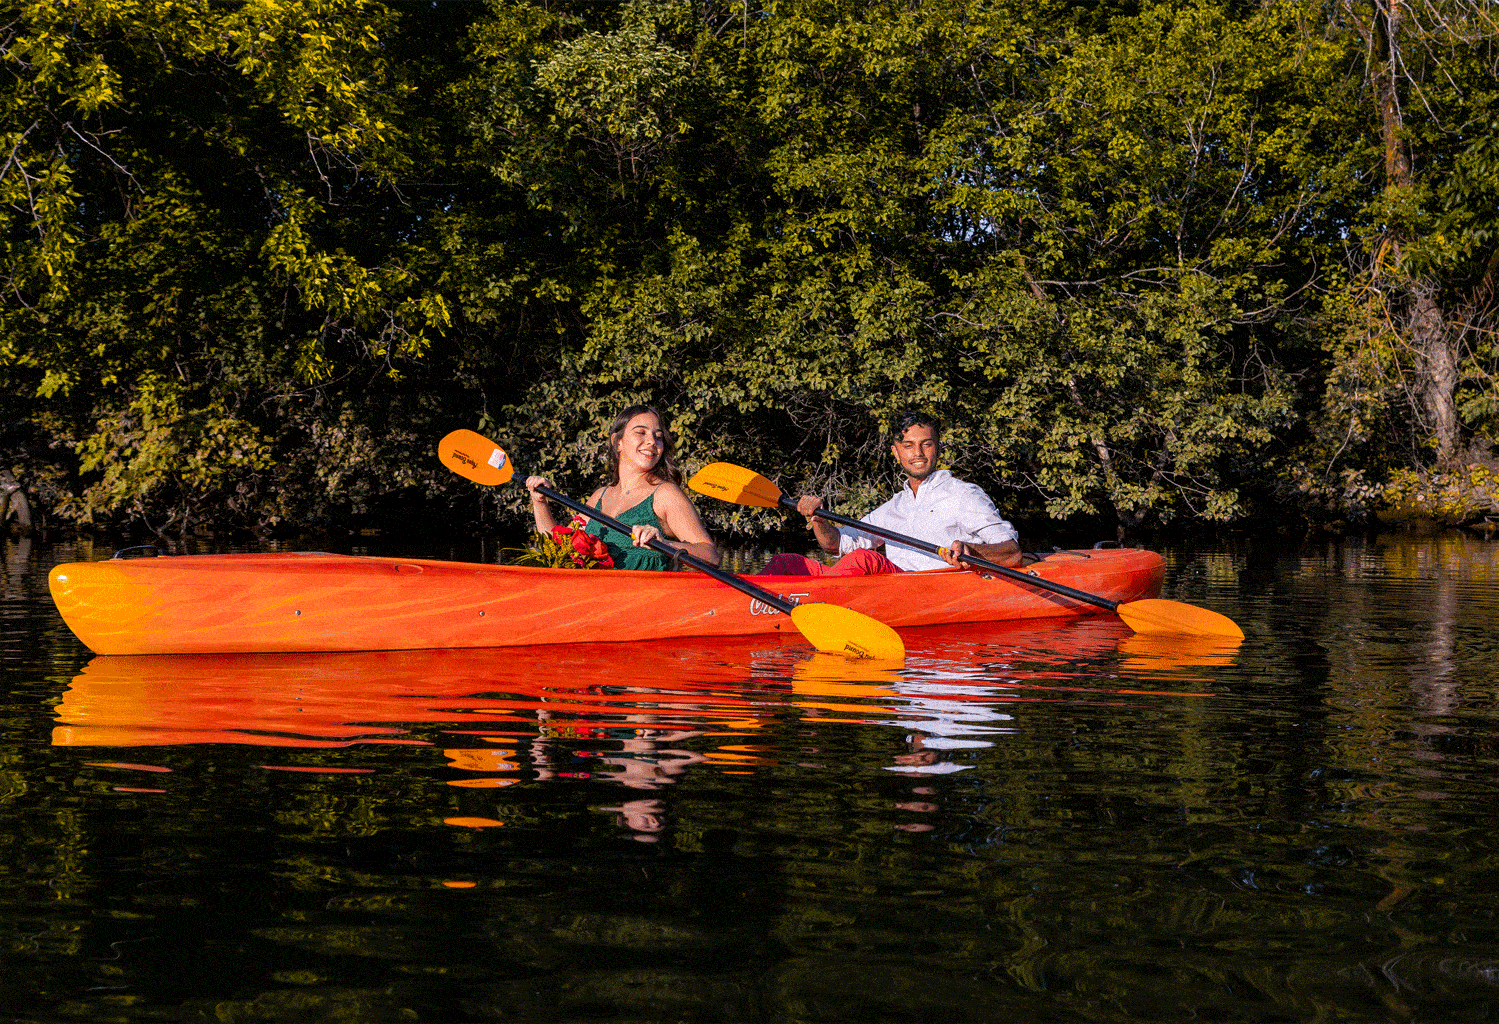 Bride and Groom kayaking at Chicago on their wedding day.